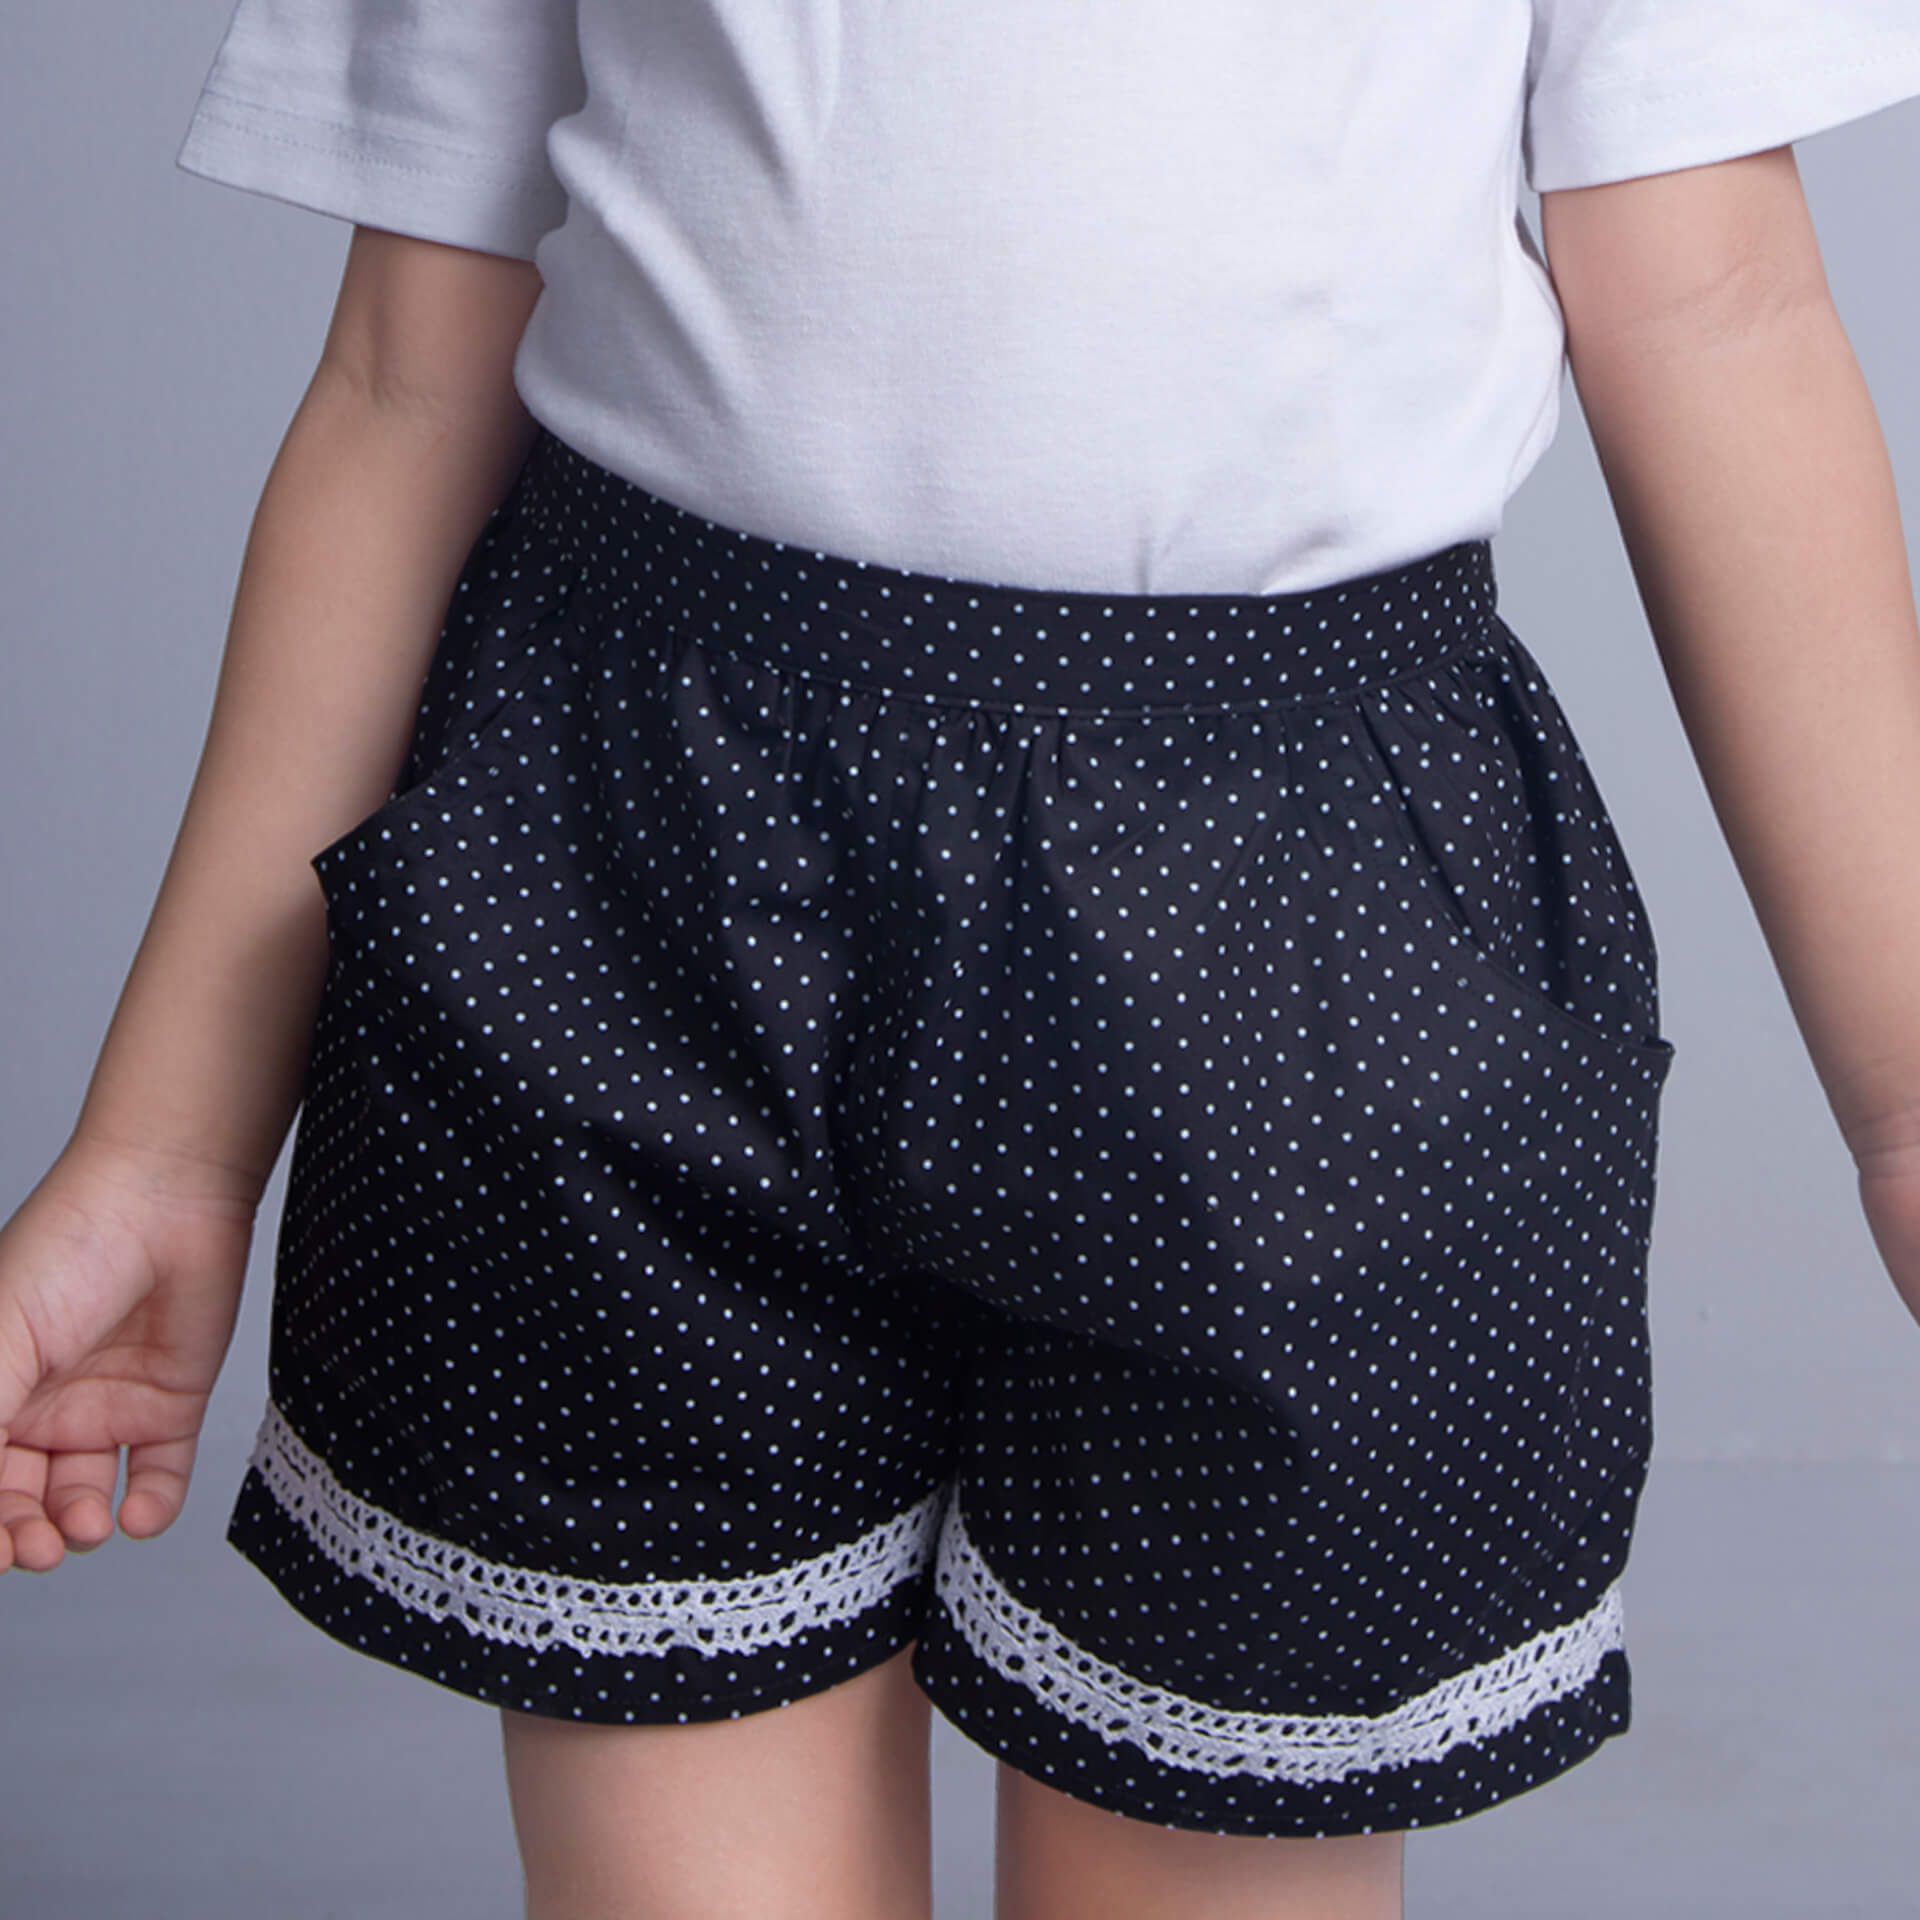 Black shorts in dot printed fabric with side pockets and contrast trims